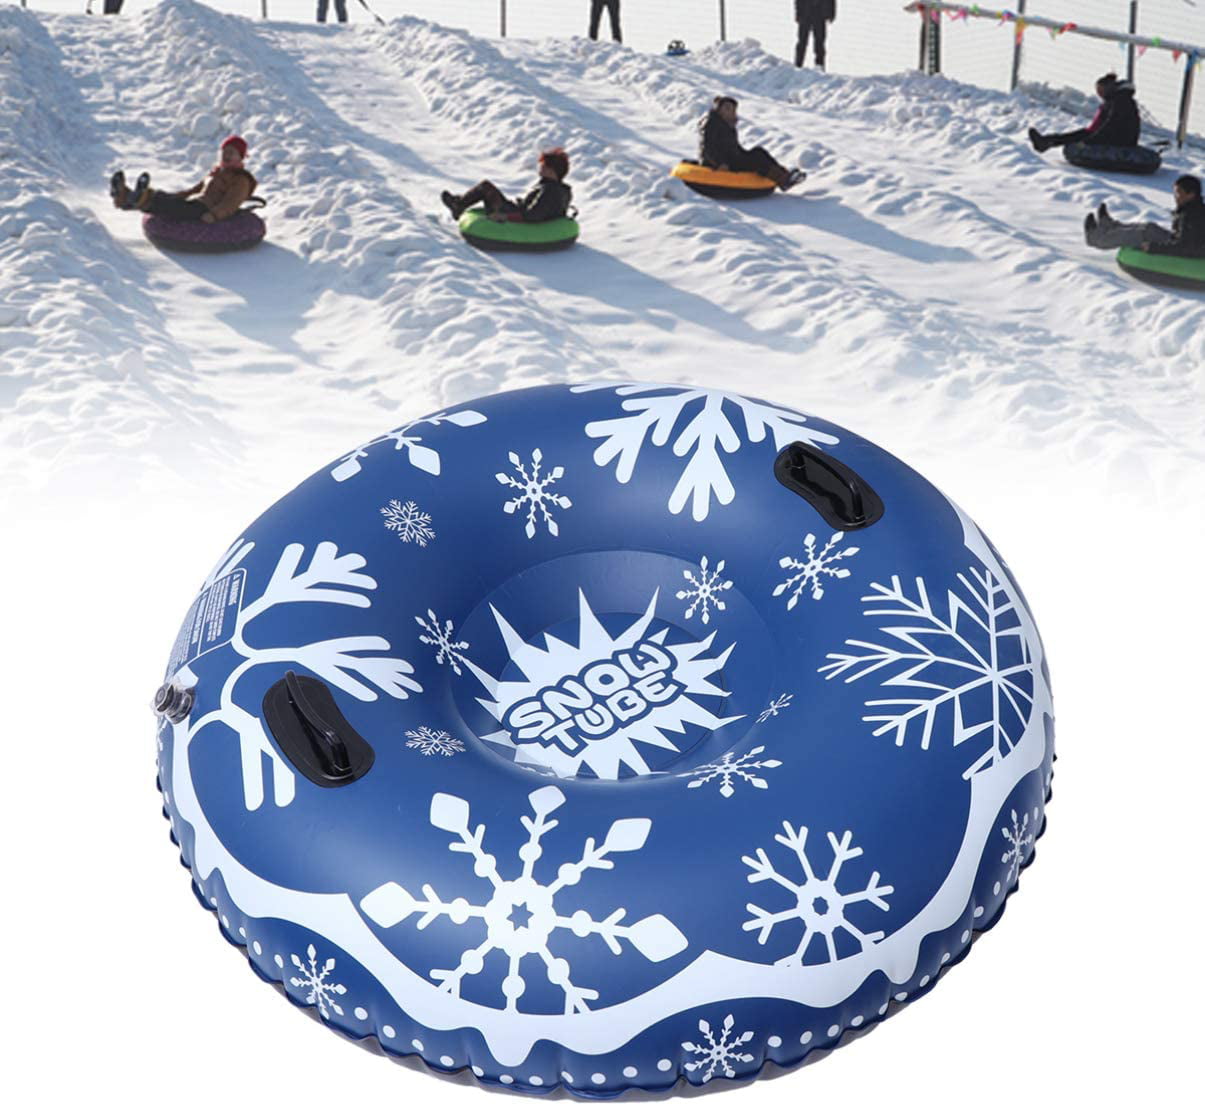 Winter HERCULES Snow Tube 37 / 47 Inflatable Sleds for Kids and Adults with Handles Fun Game Toboggan Snow Toys Heavy Duty Snow Sled for Outdoor Skiing